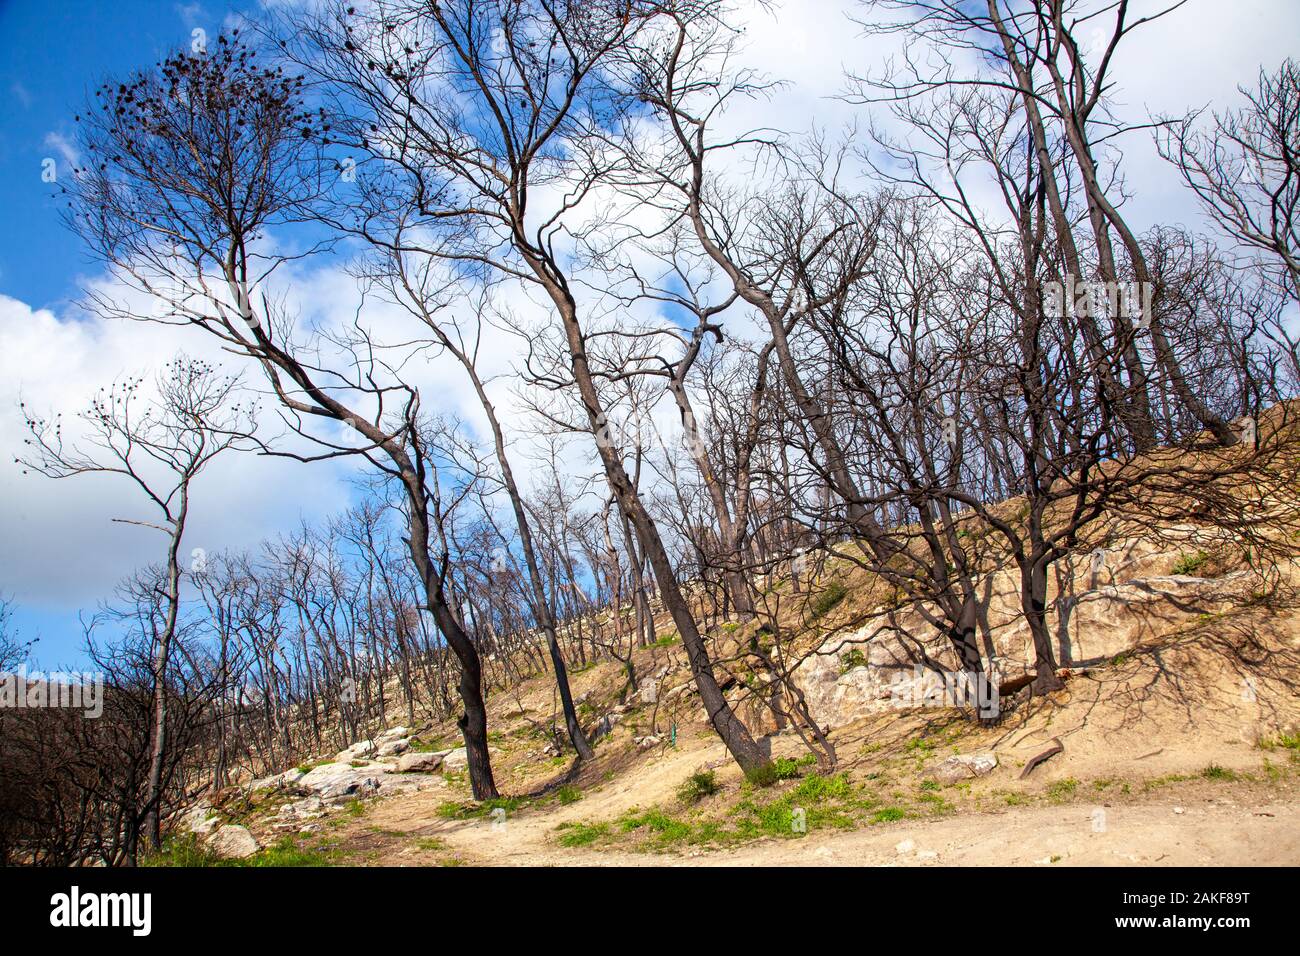 Israel, Carmel forest, the forest is regrowing after the fire devastation. An ongoing argument between two schools of thought has caused this forest t Stock Photo